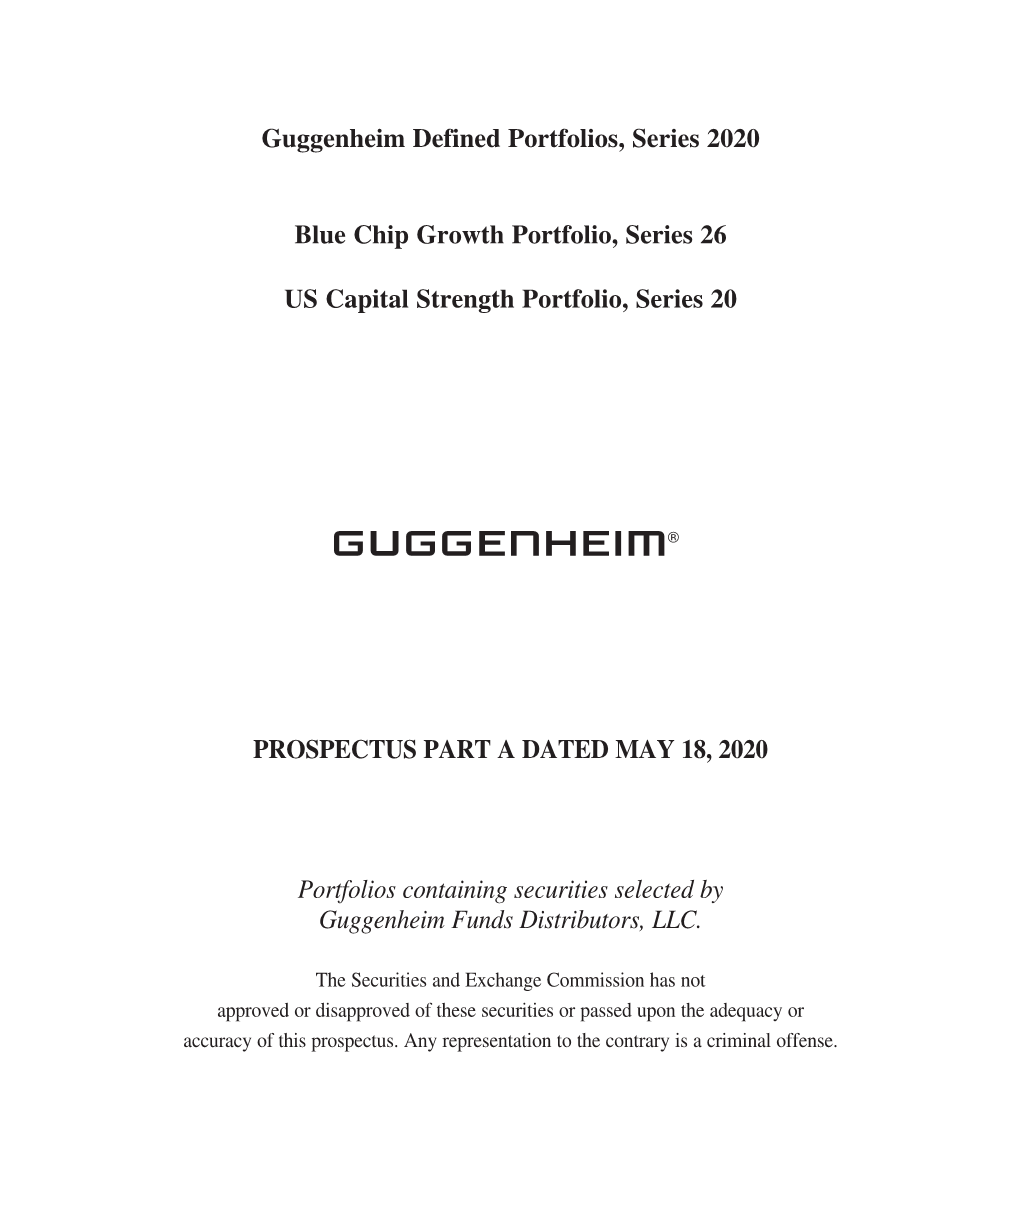 Guggenheim Defined Portfolios, Series 2020 Blue Chip Growth Portfolio, Series 26 the Trust Portfolio As of the Inception Date, May 18, 2020